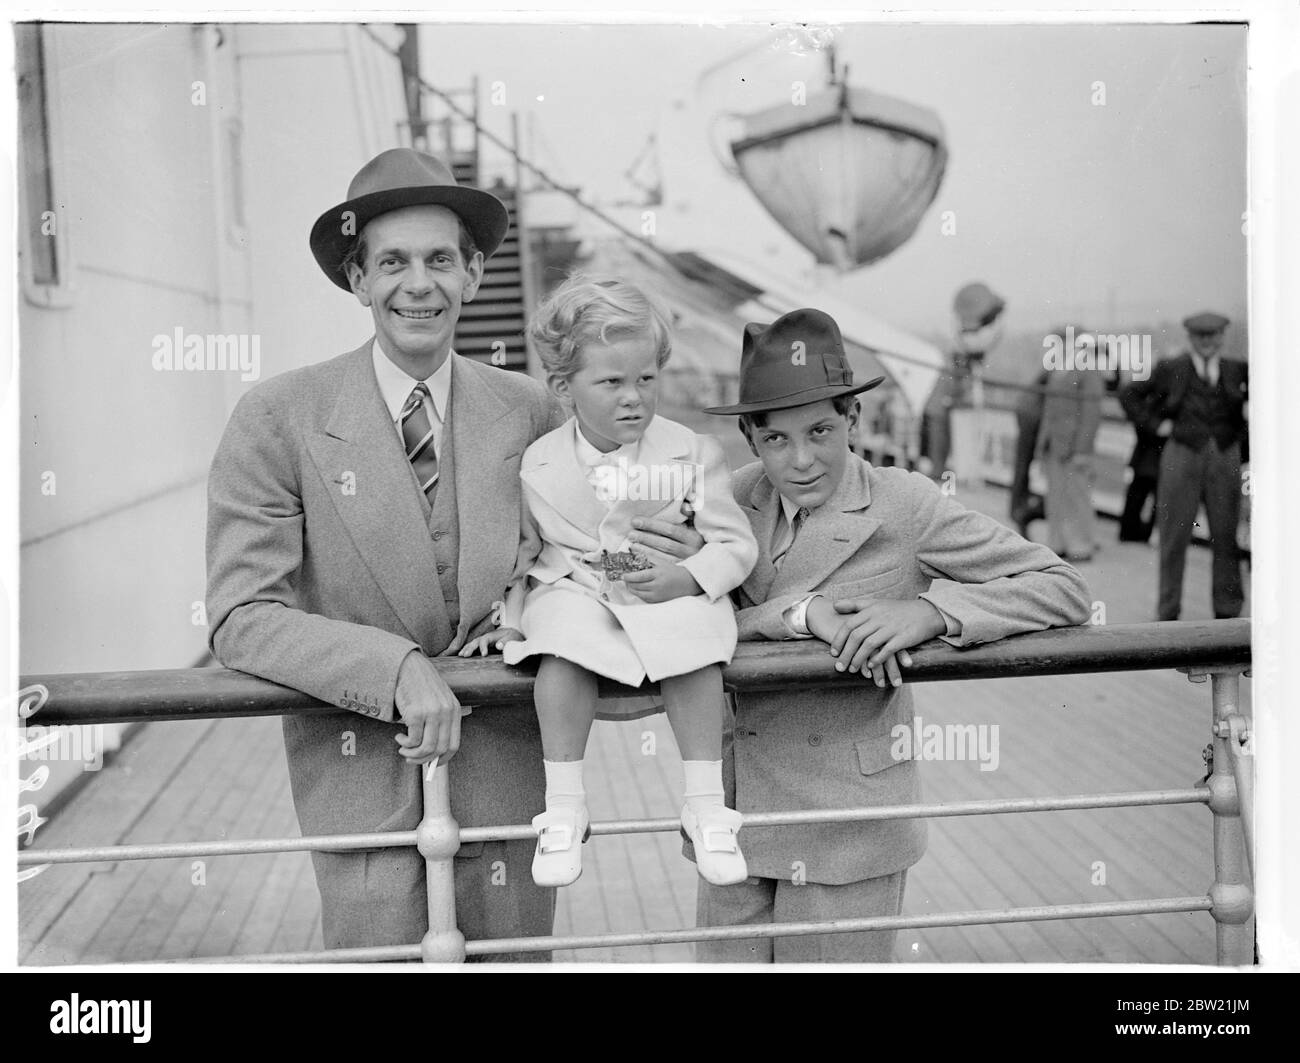 Raymond Massey, the film actor whose sudden collapse in Hollywood studio prevented him being present at the birth of his daughter, arrived at Southampto on the Queen Mary from America. Raymond Massey with his sons, Daniel (3) and Jeffrey (12) met him on arrival. 30 August 1937 Stock Photo